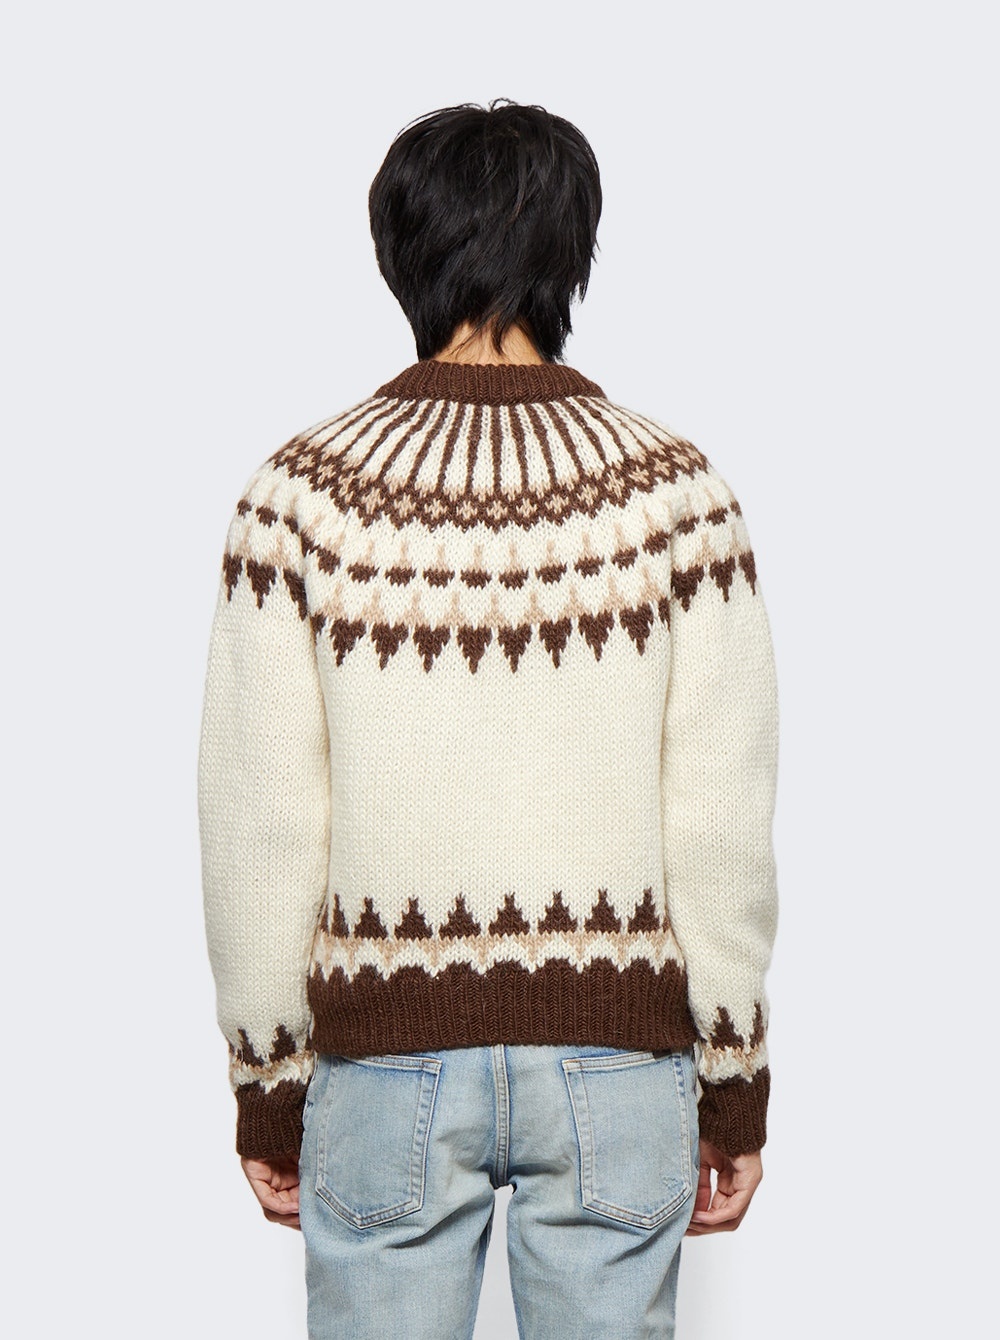 Knit Sweater Beige And Maroon - 5